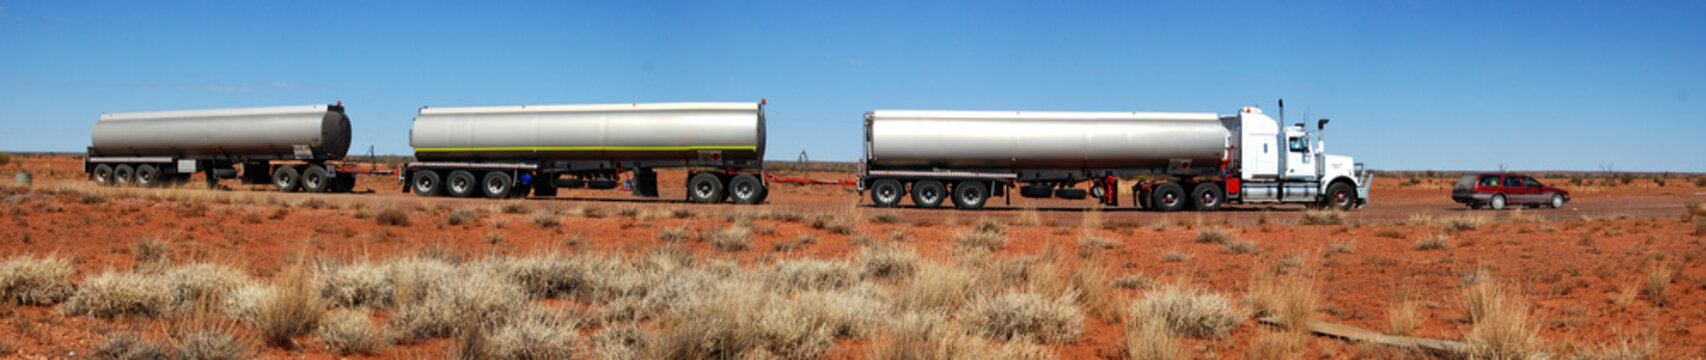 Huge Australia Road train comparison with station wagon car in the red dirt outback